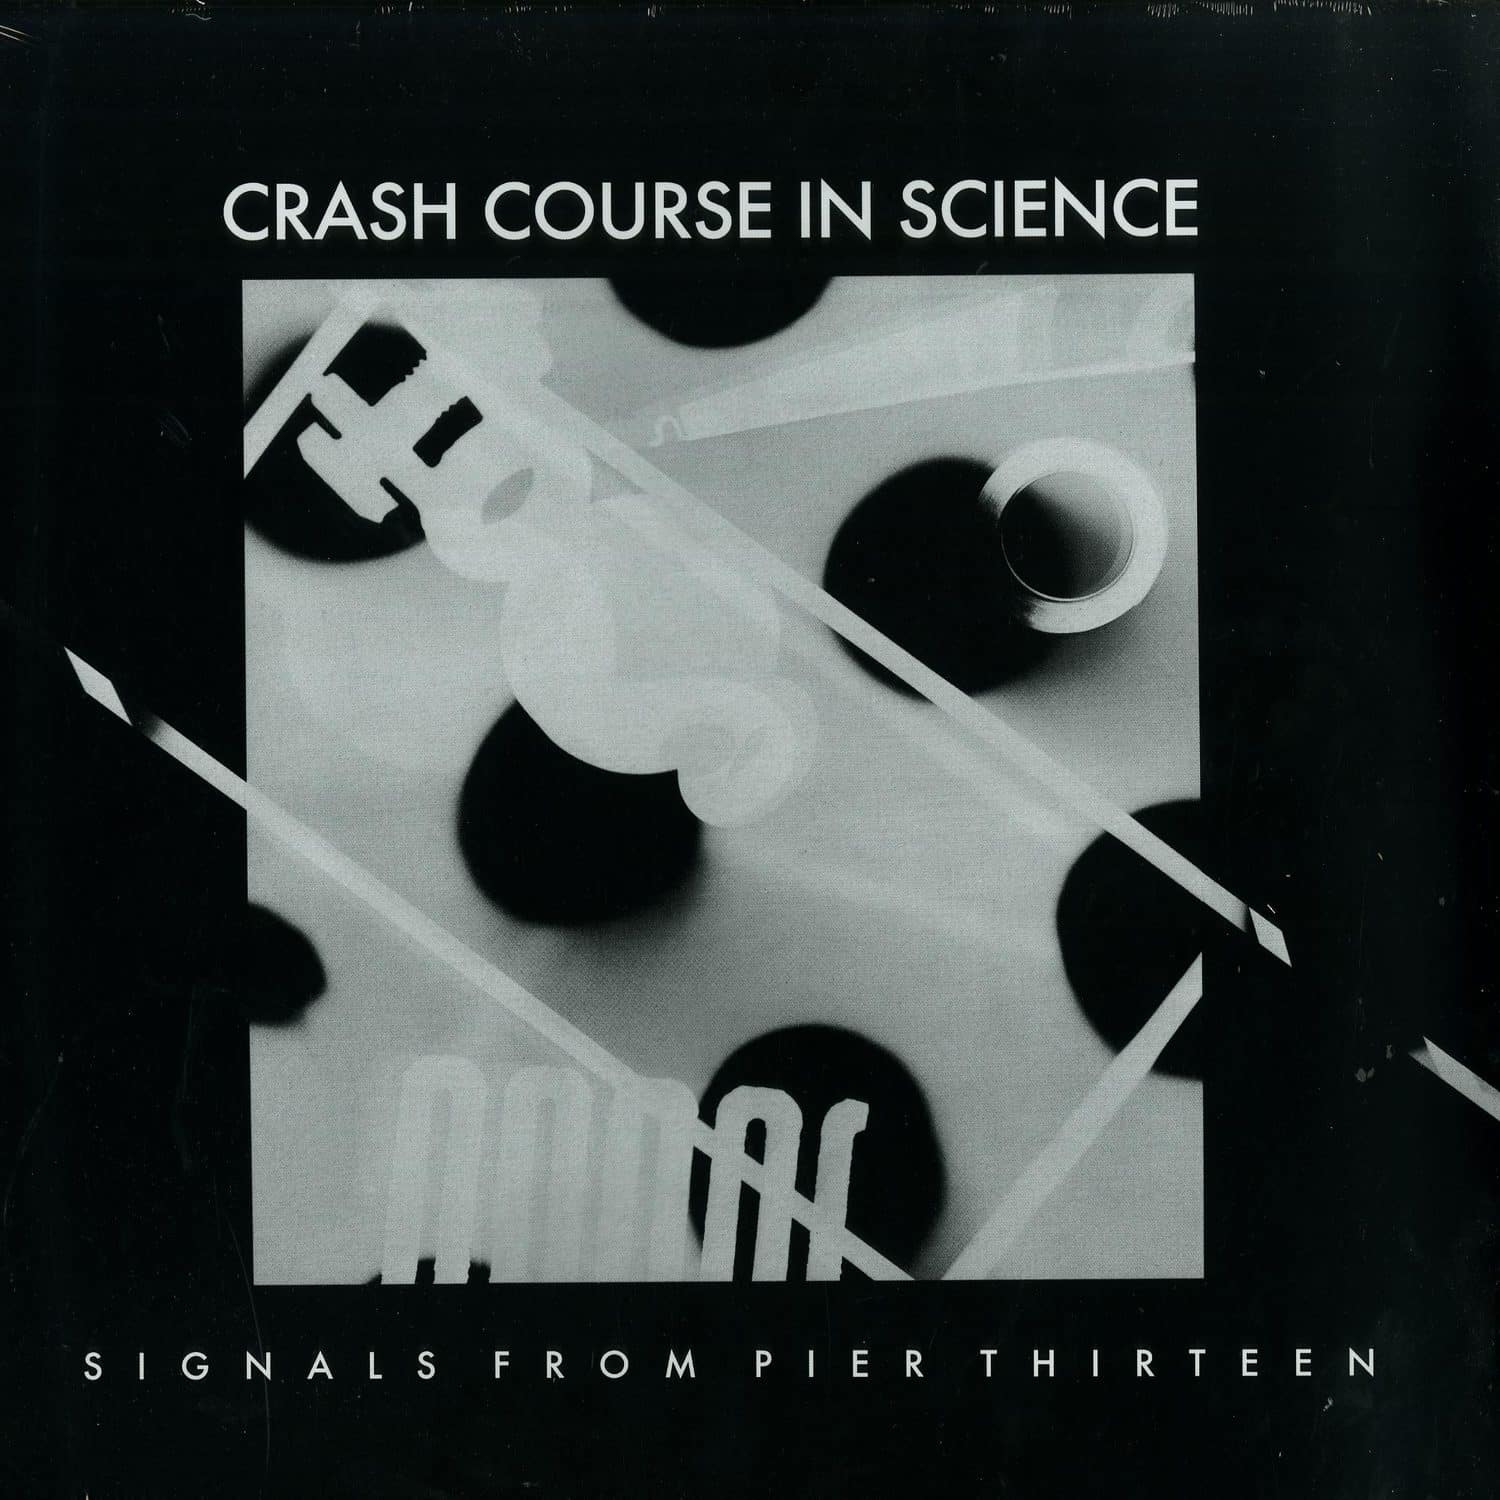 Crash Course In Science - SIGNALS FROM PIER THIRTEEN